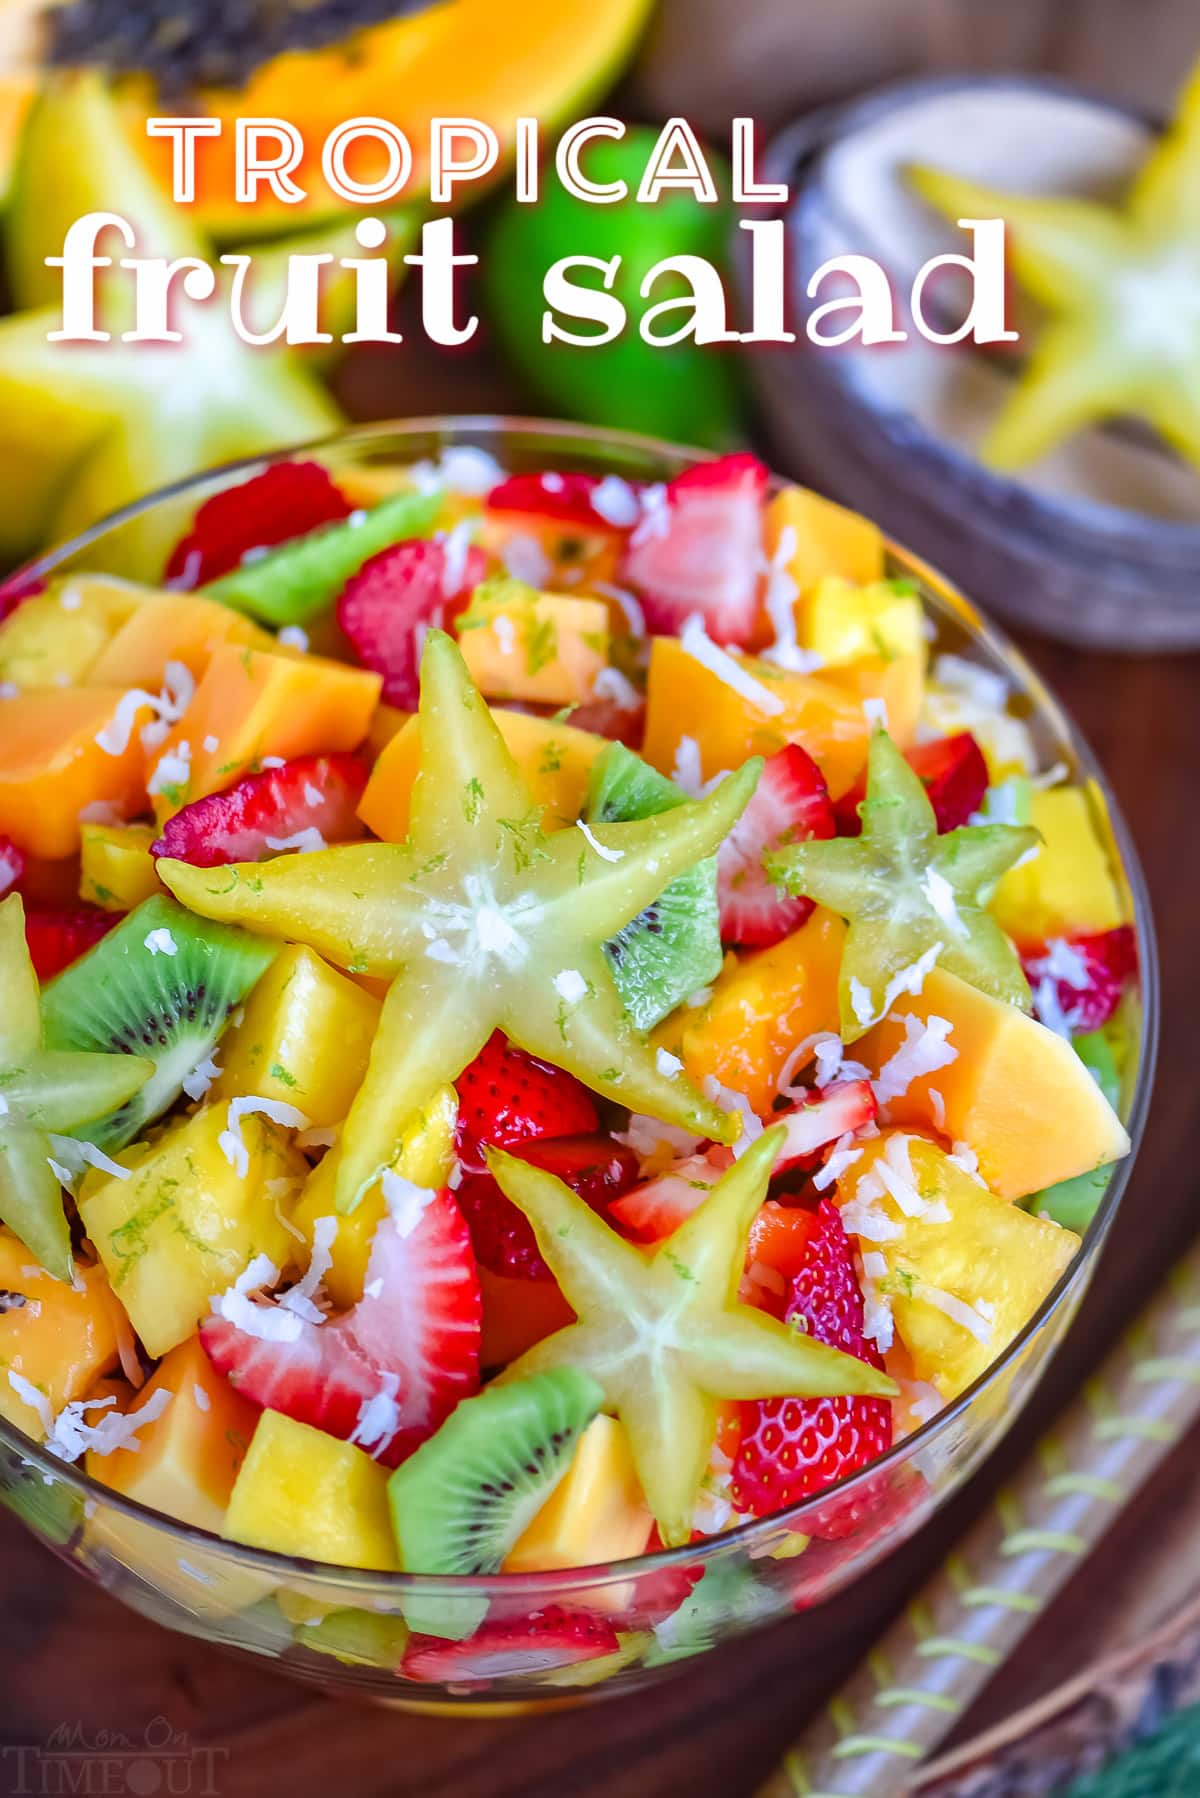 fruit salad made with tropical fruits like kiwi, papaya, mango and more in a large glass bowl. title overlay at top of image.